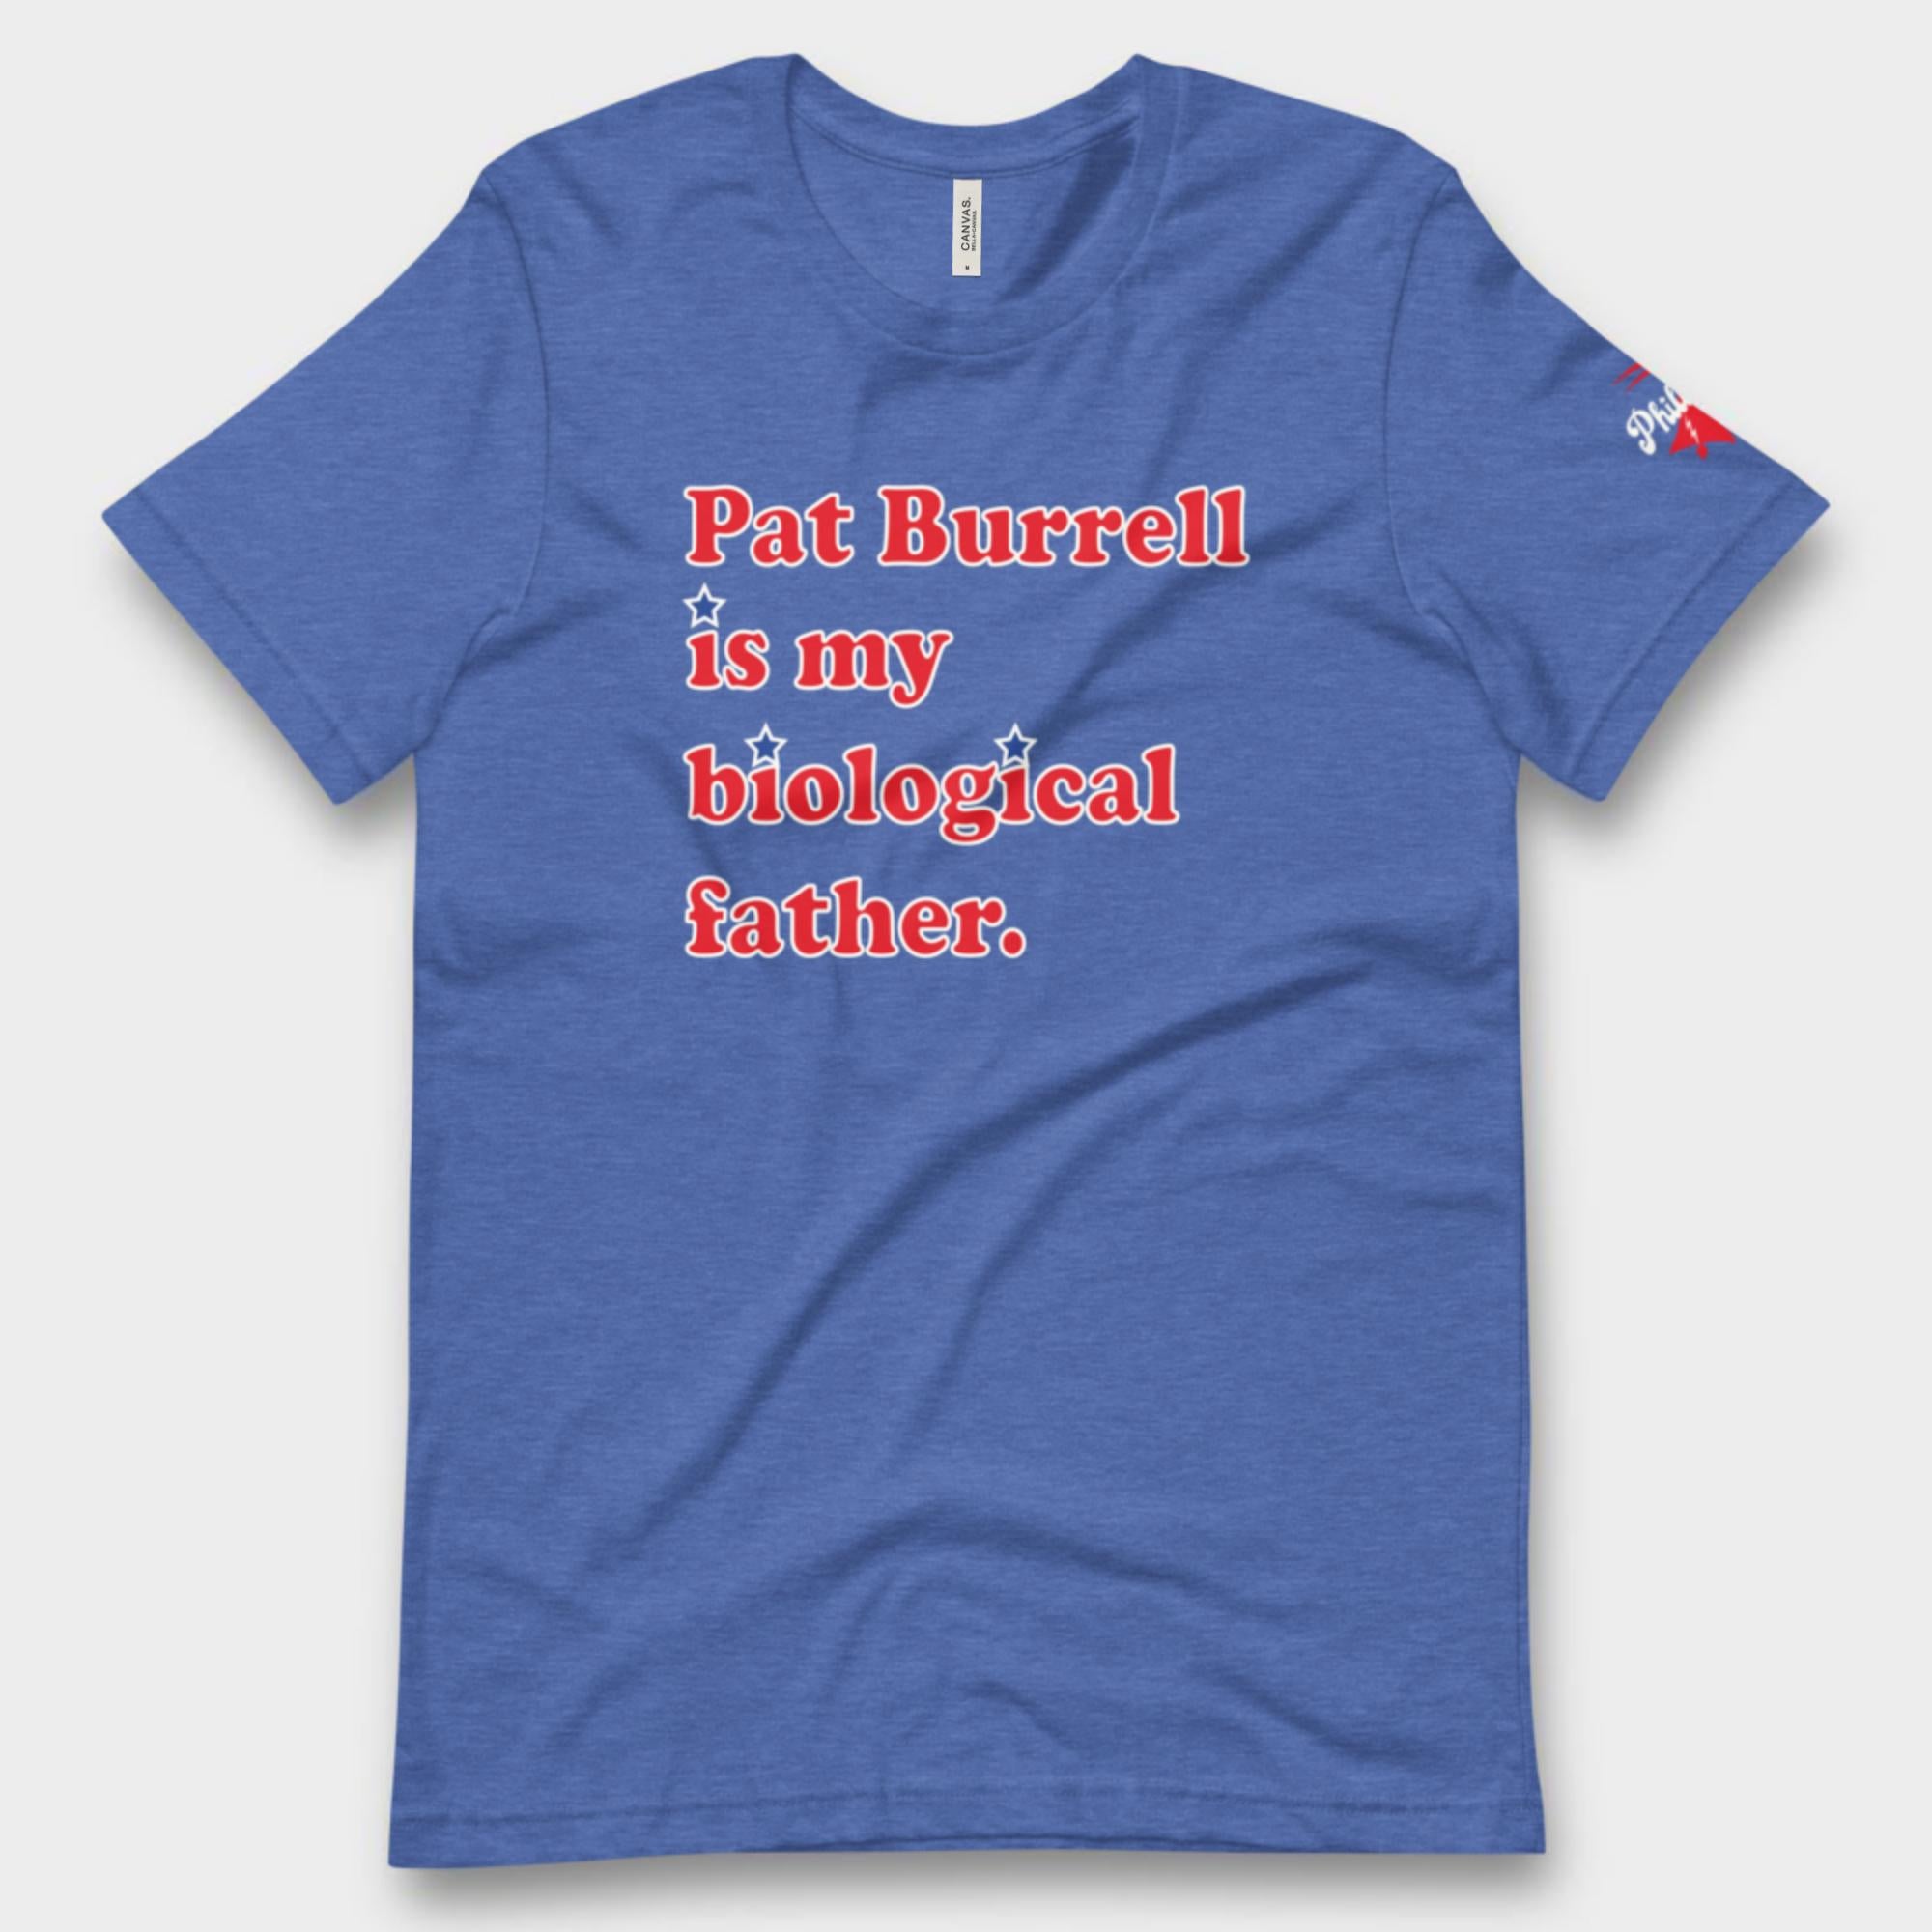 "Pat Burrell Is My Biological Father" Tee